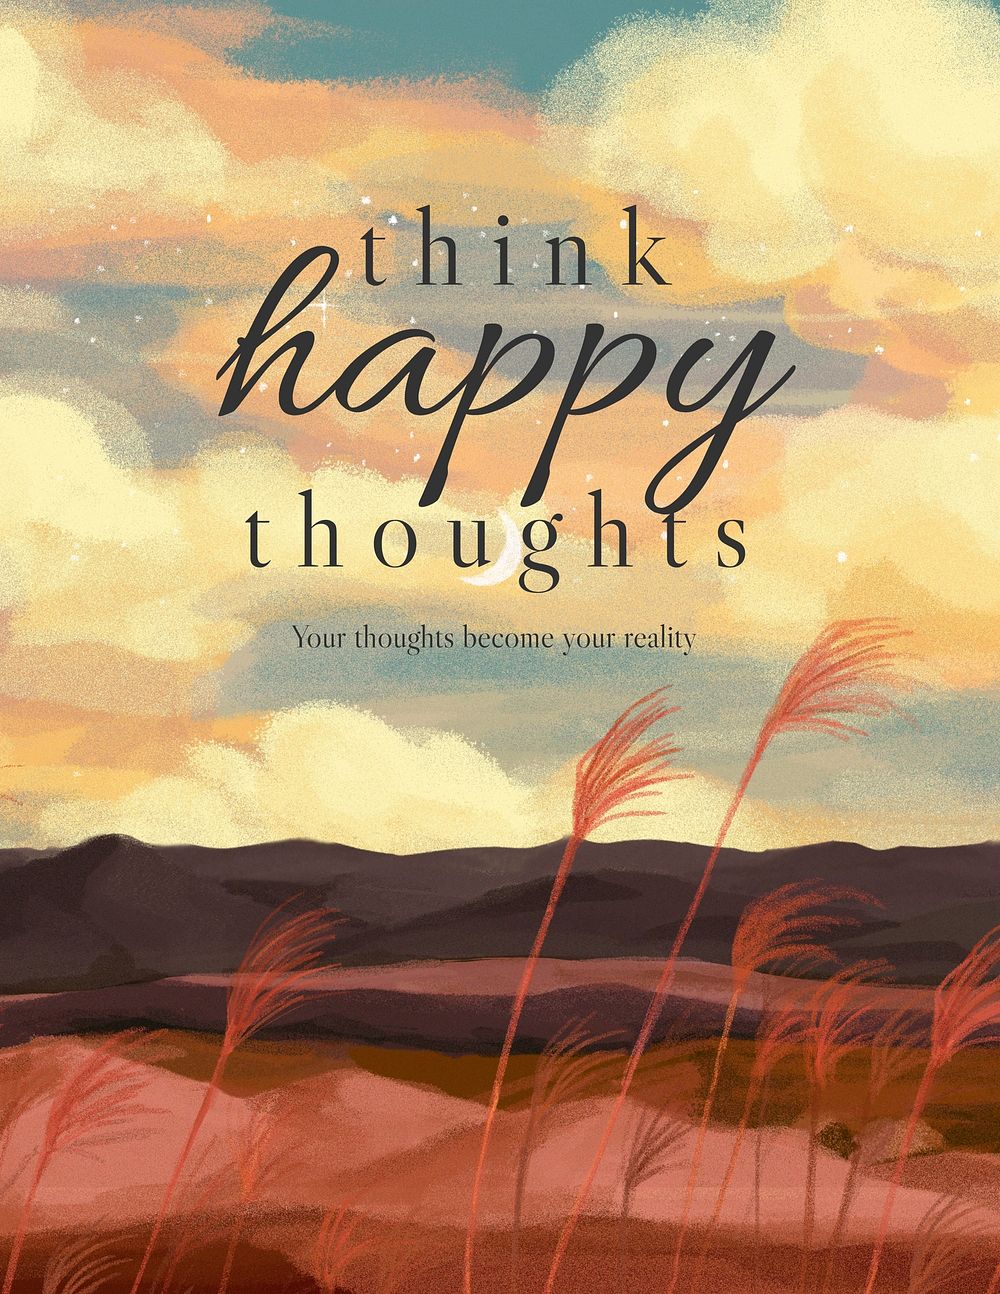 Think happy thoughts poster template